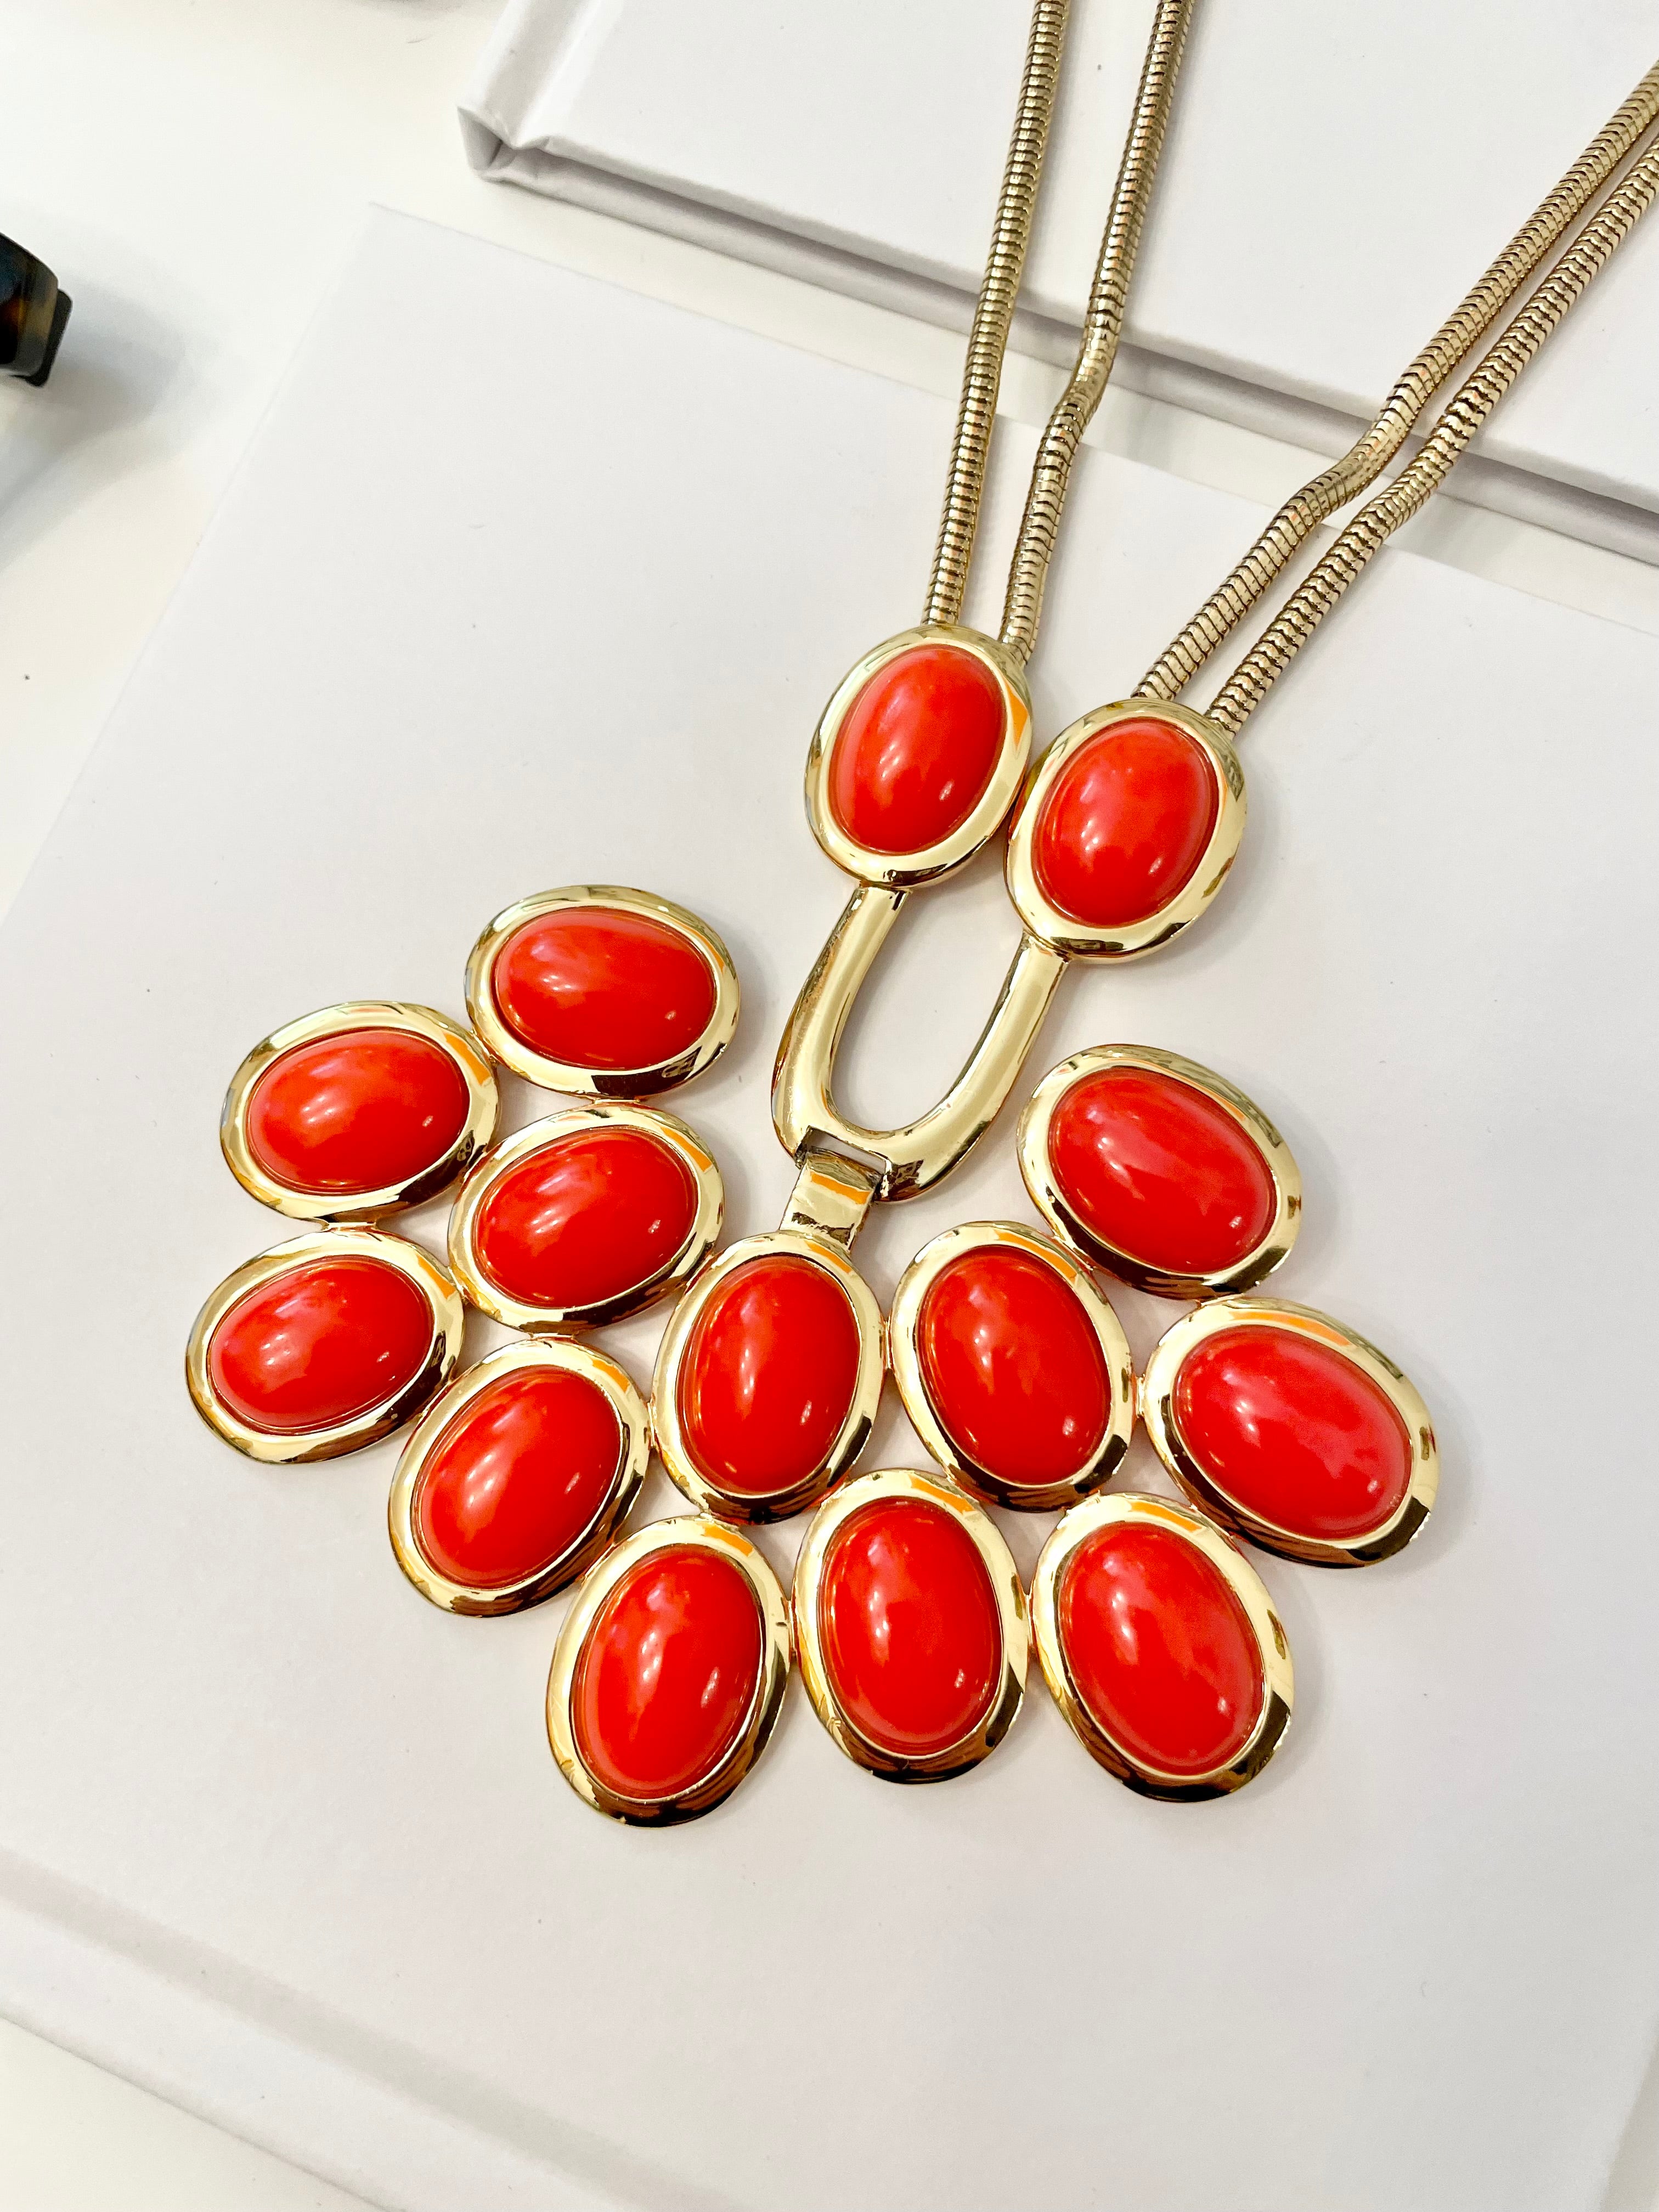 Trina Turk stunning faux coral cabochon stone runway necklace.... so chic